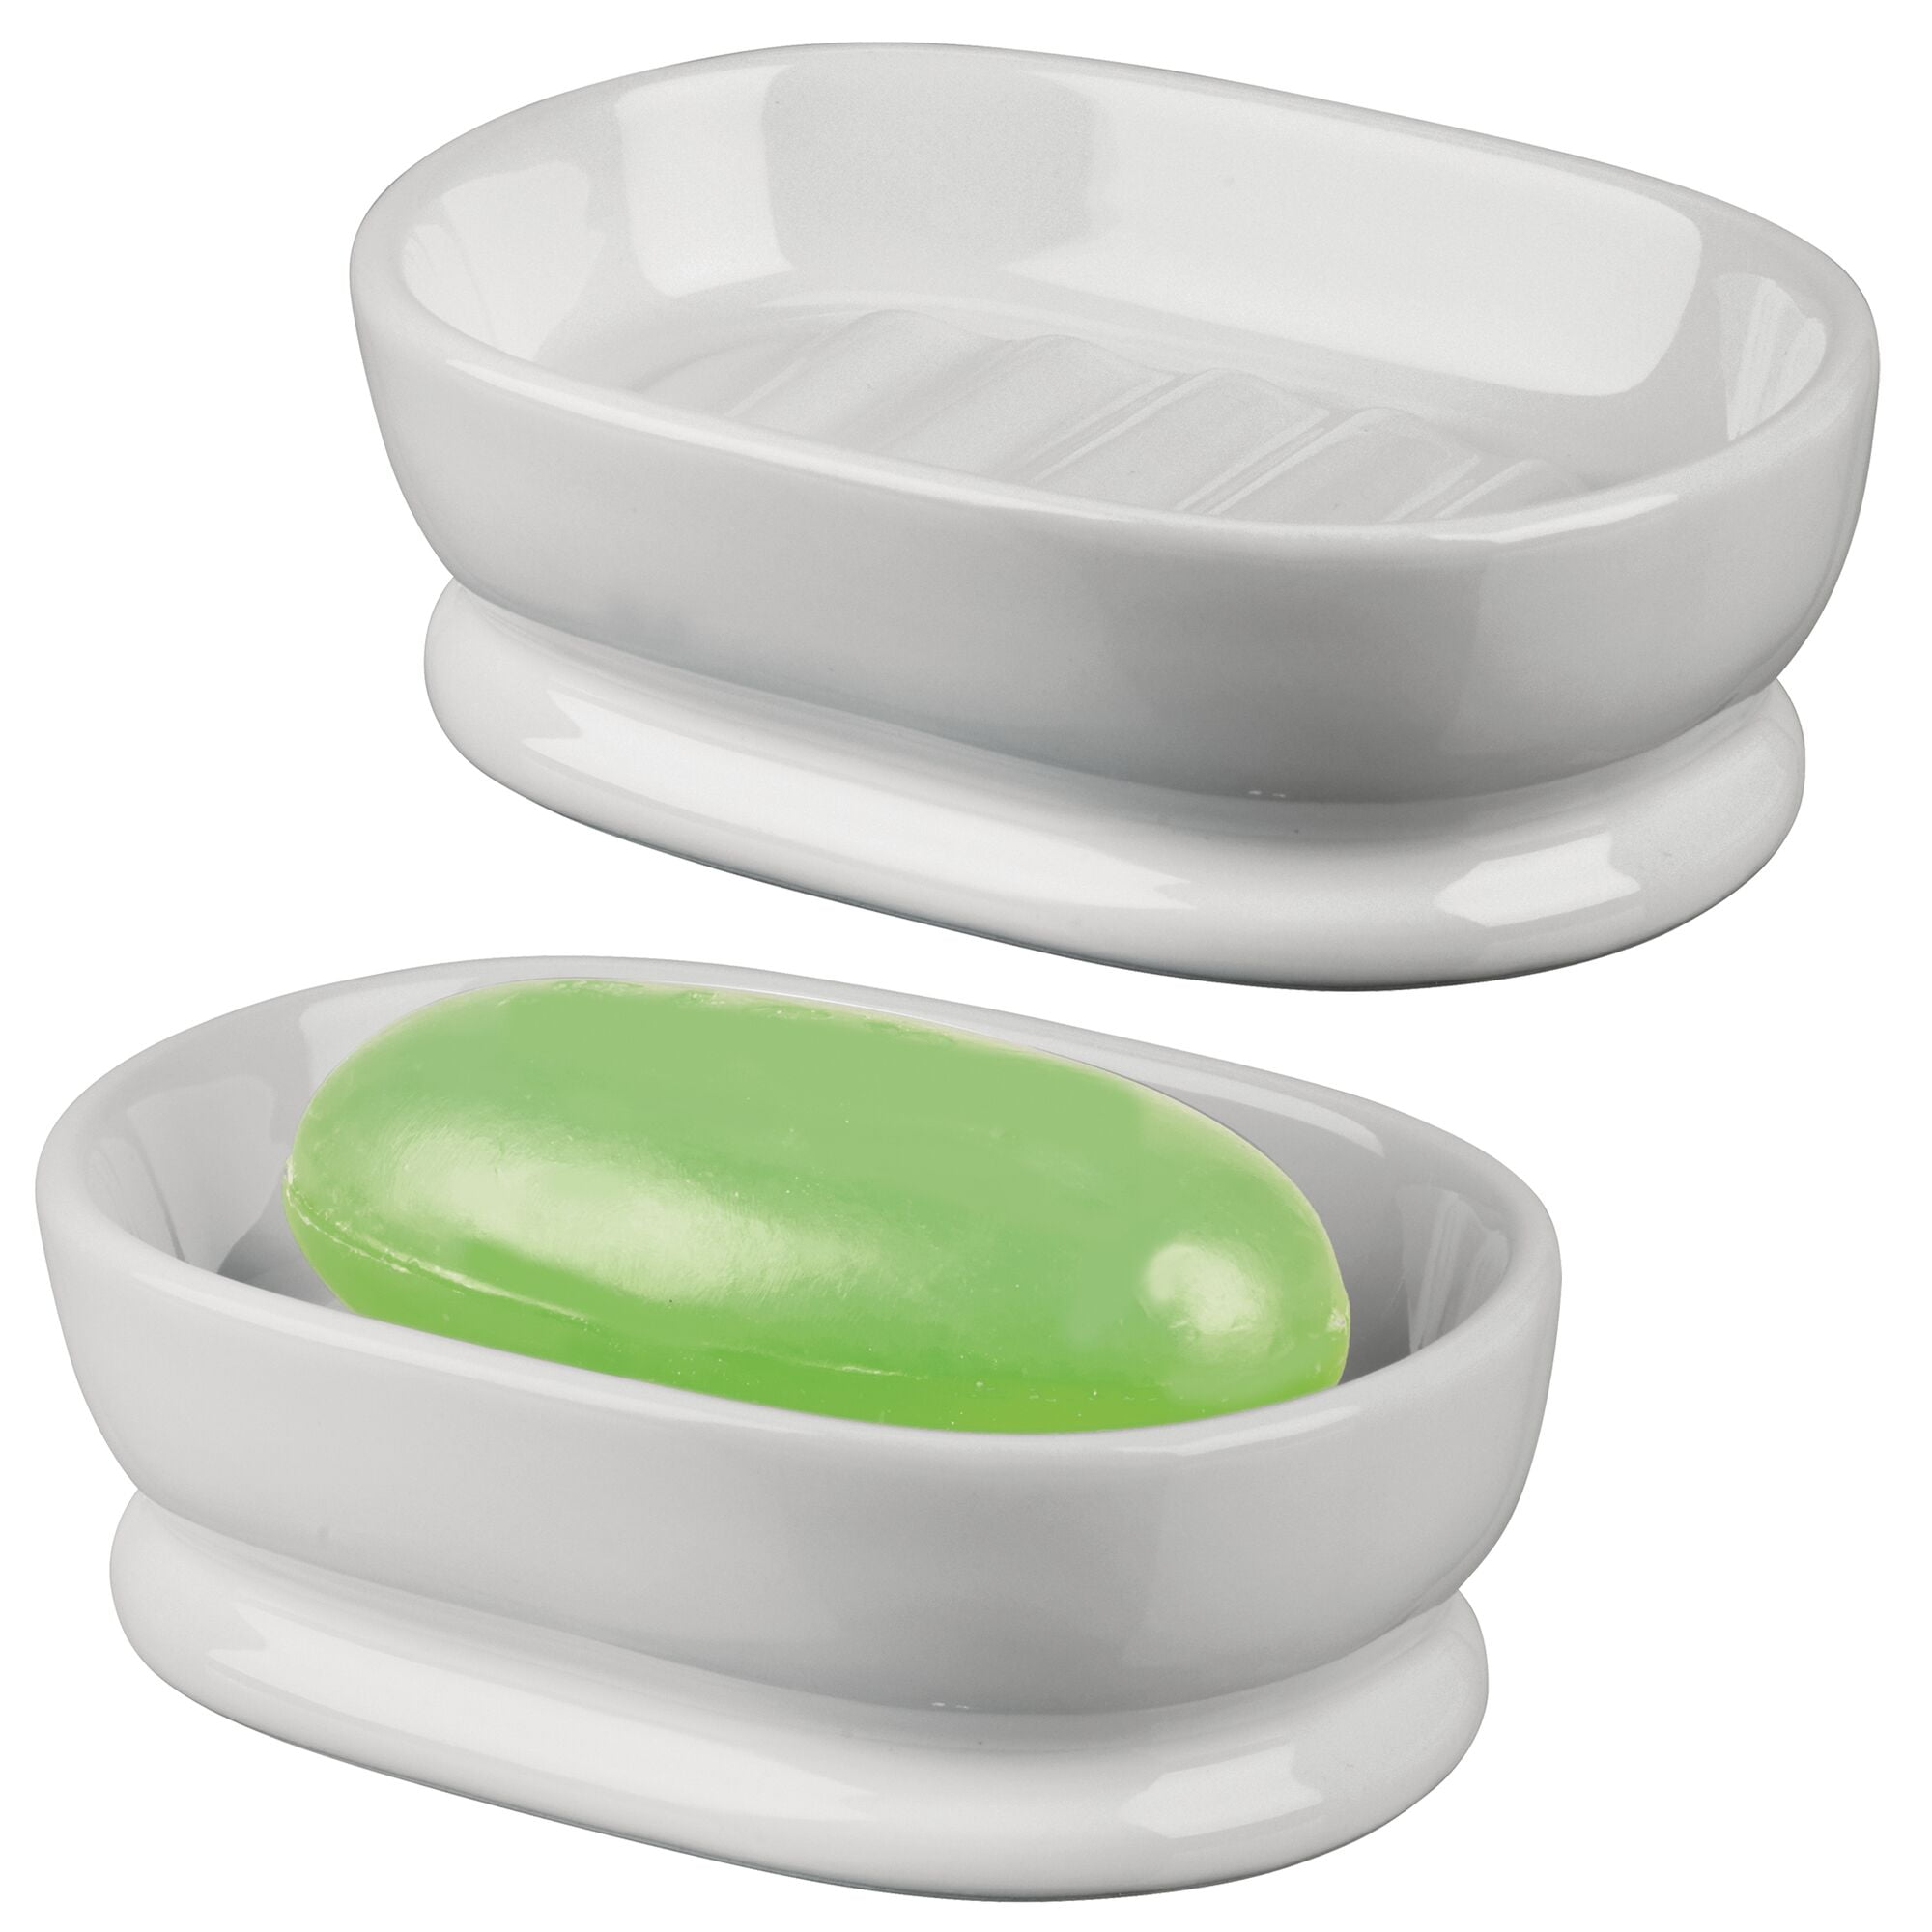 Details about   mDesign Ceramic Bar Soap Dish Tray for Bathroom 2 Pack White Kitchen Sink 